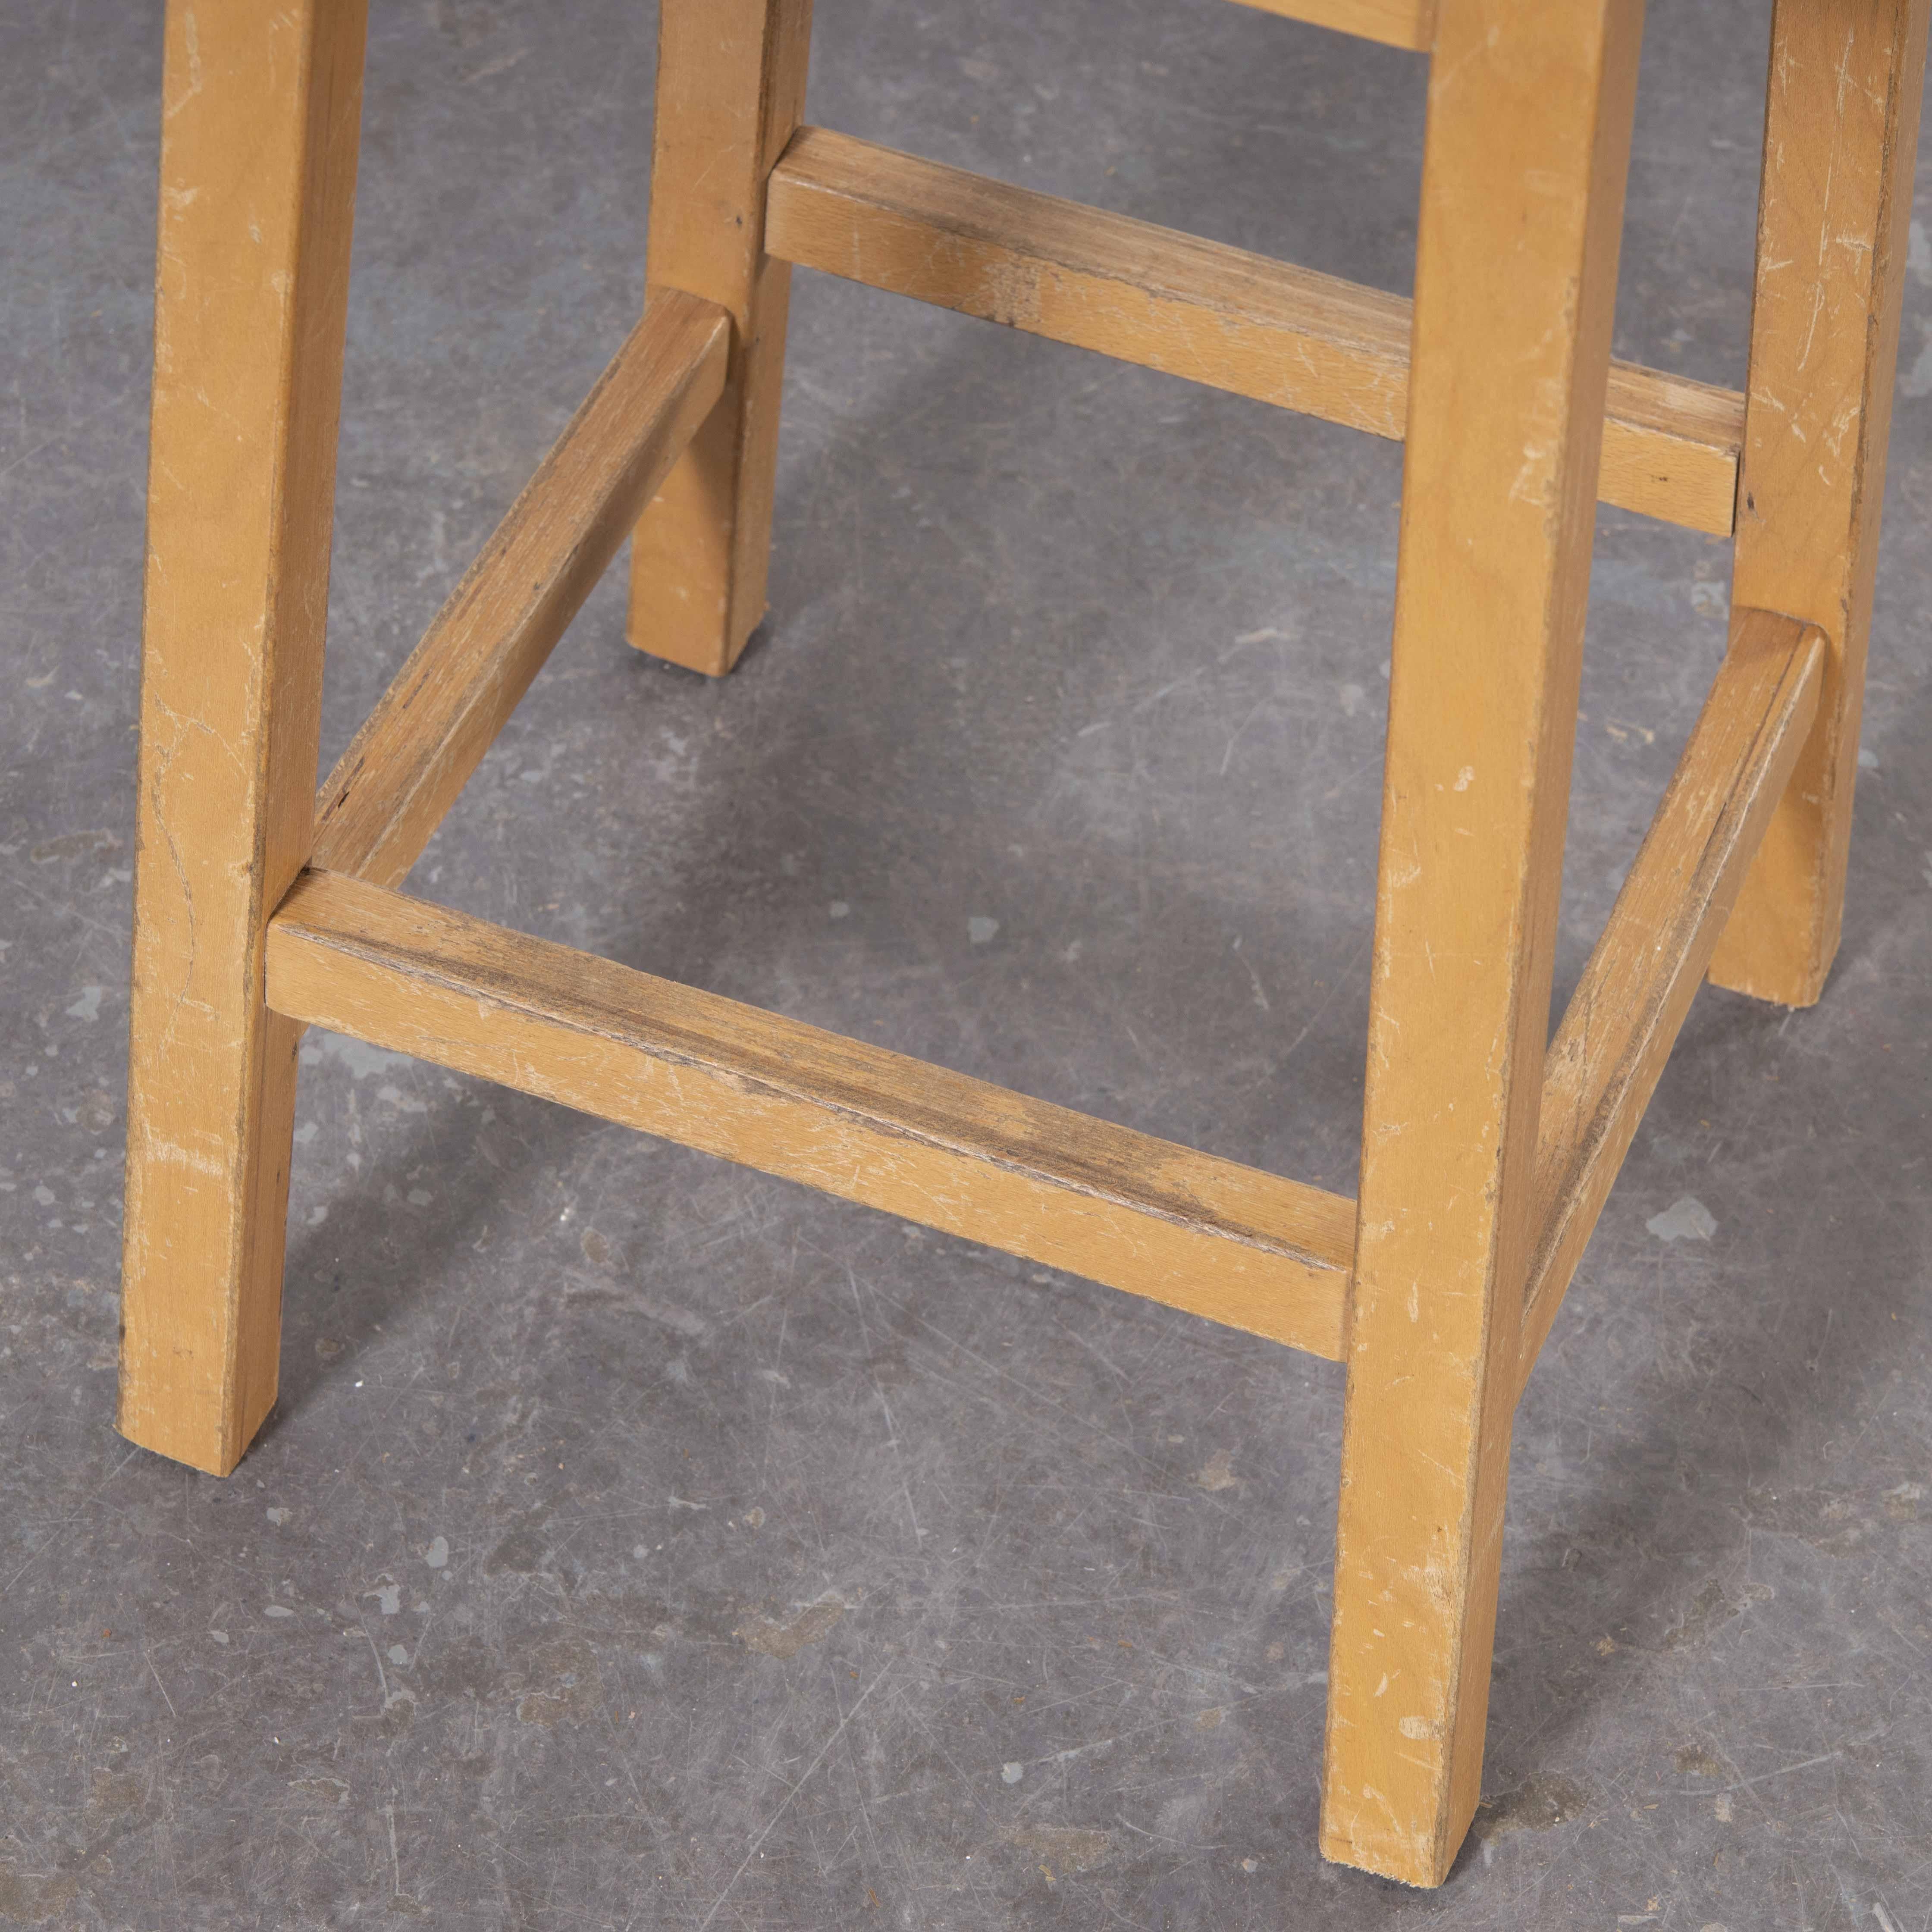 1950’s Laboratory stools By Lamstak – set of six
1950’s Laboratory stools By Lamstak – set of six. Lamstak was a large producer of furniture in the mid century period. They pioneered making chairs using laminated bentwood for strength and these are